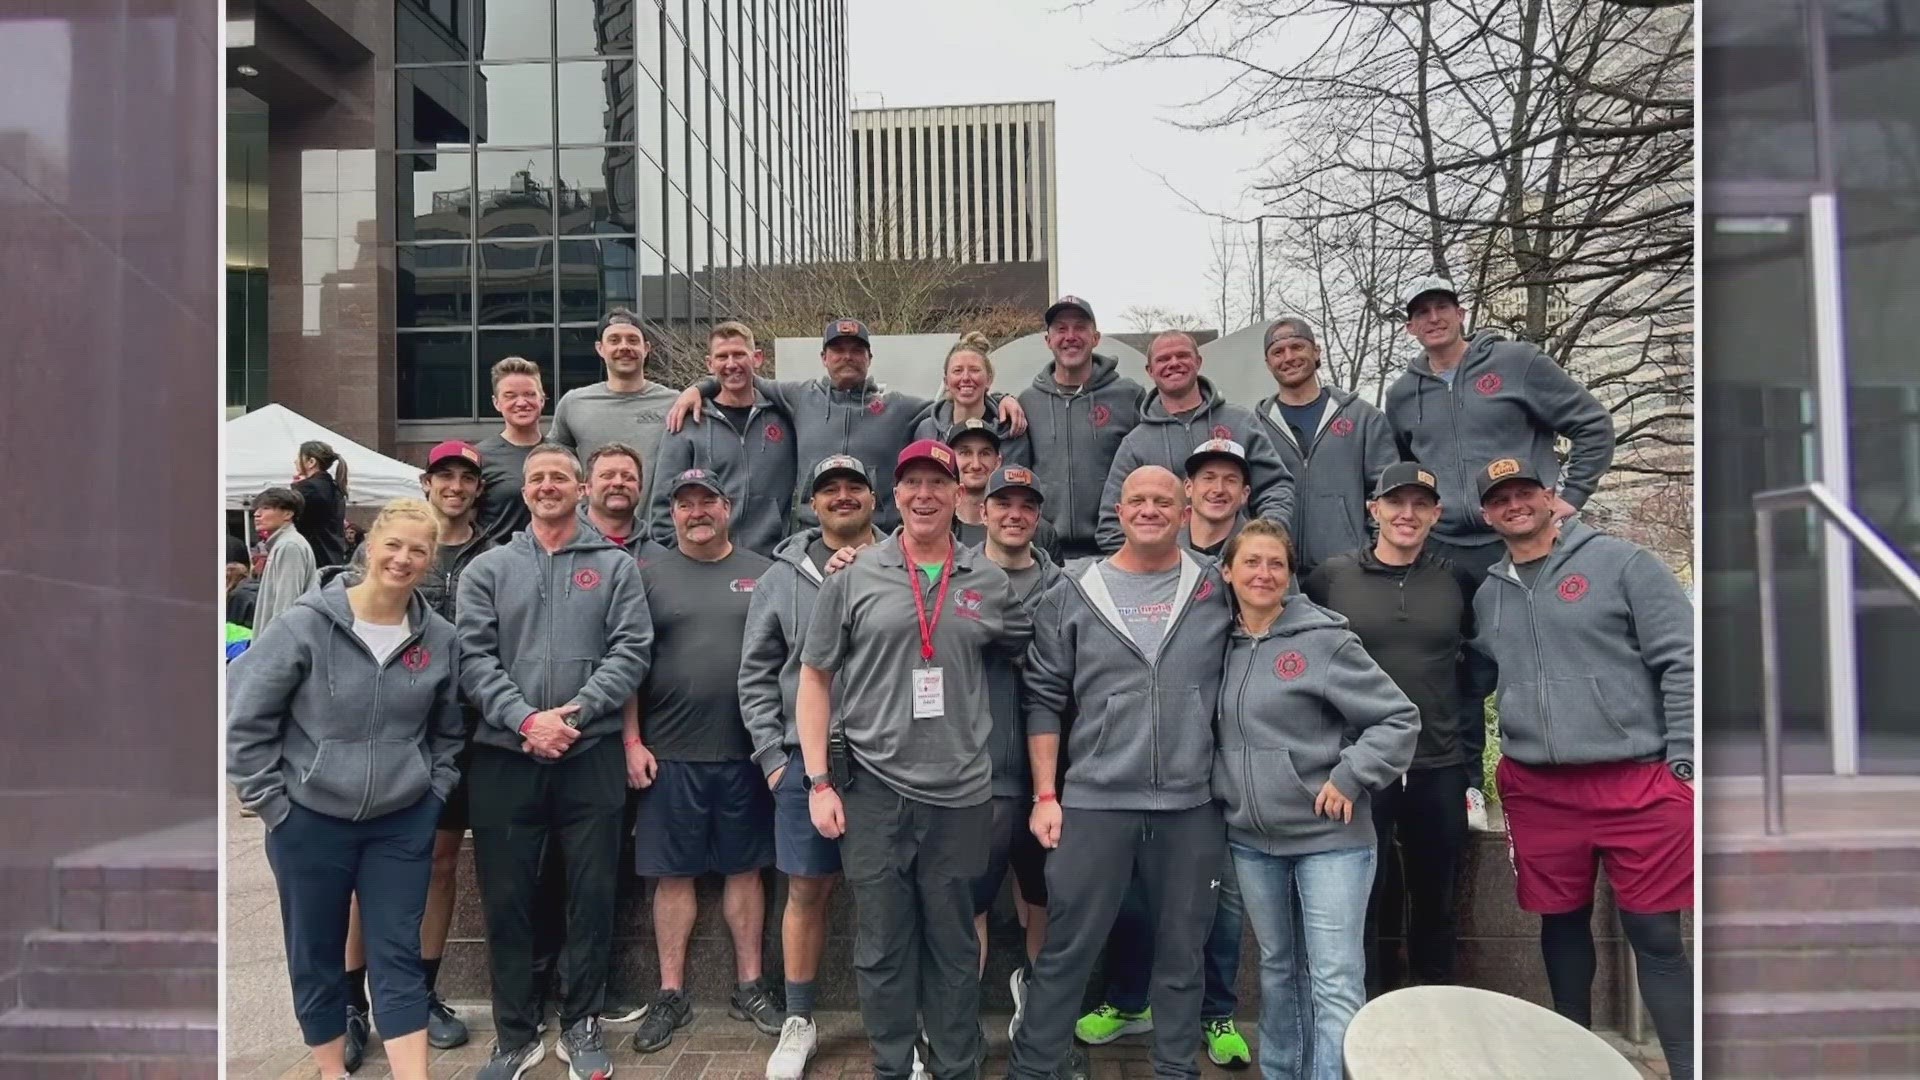 Thousdands of firefighters climbed the stairs at Seattle's Columbia Tower to raise awareness and funds for blood cancer research